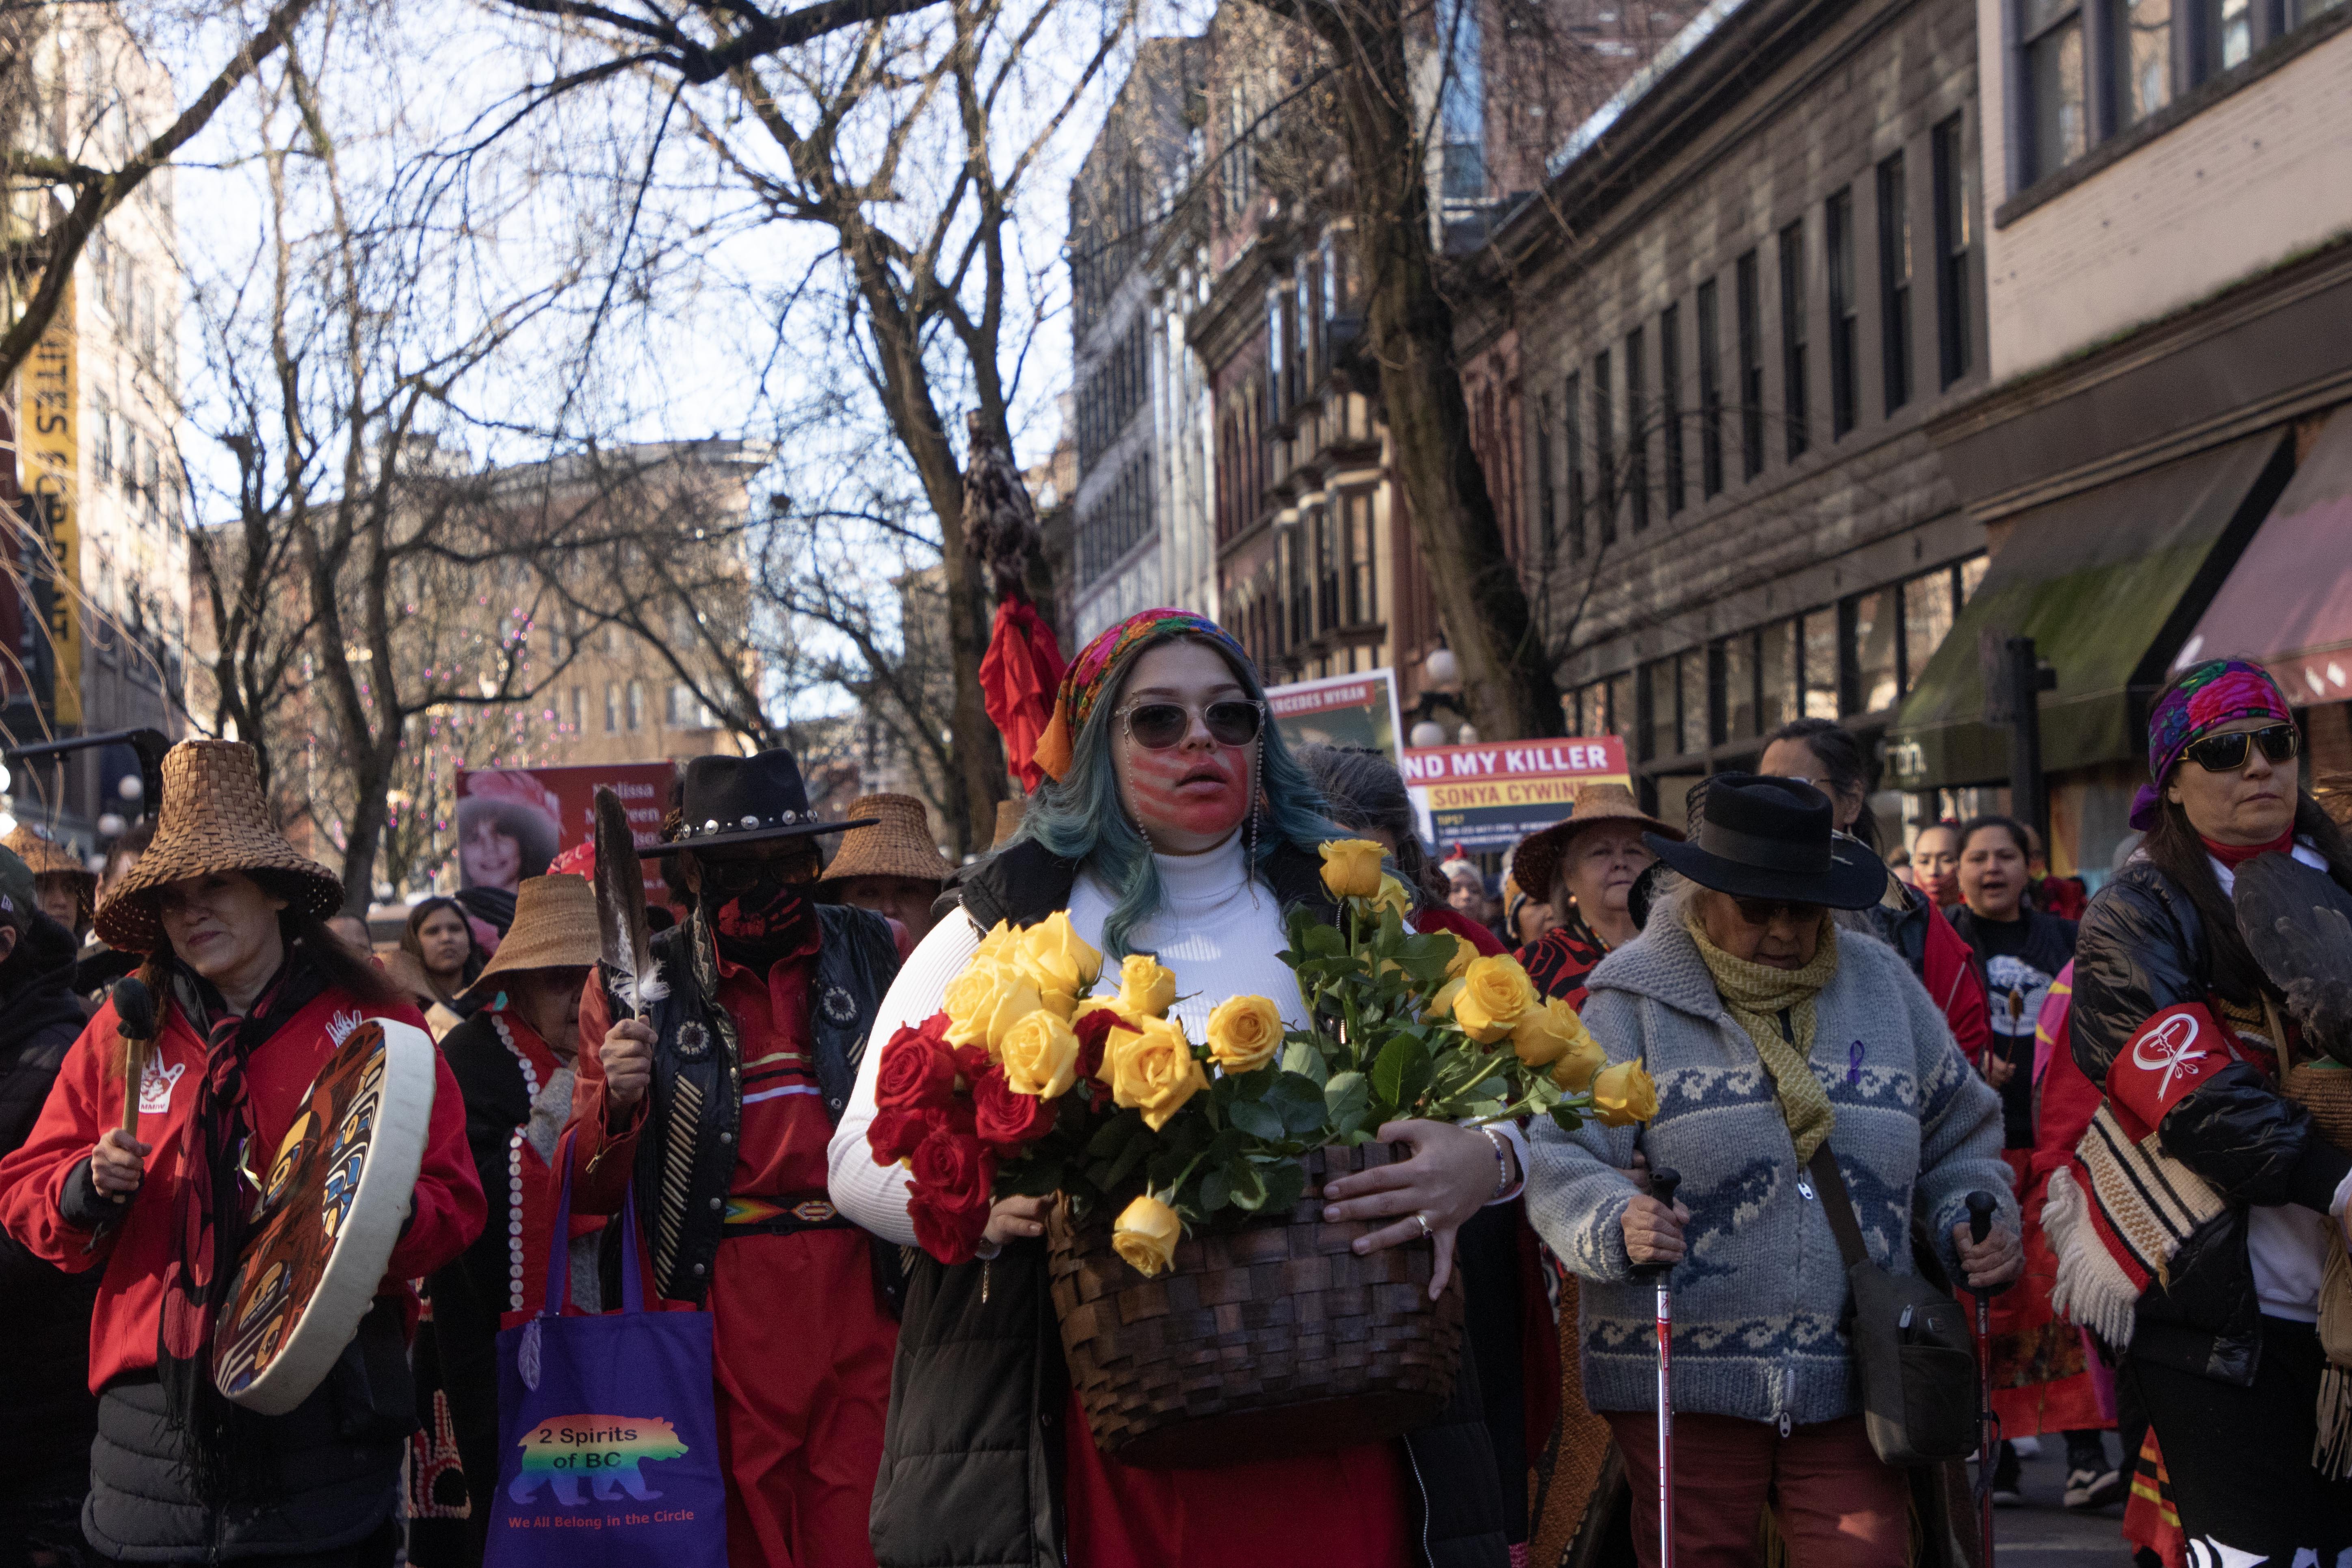 The march began at Main and Hastings and proceeded through Gastown, with participants singing healings songs, drumming and scattering flower petals.